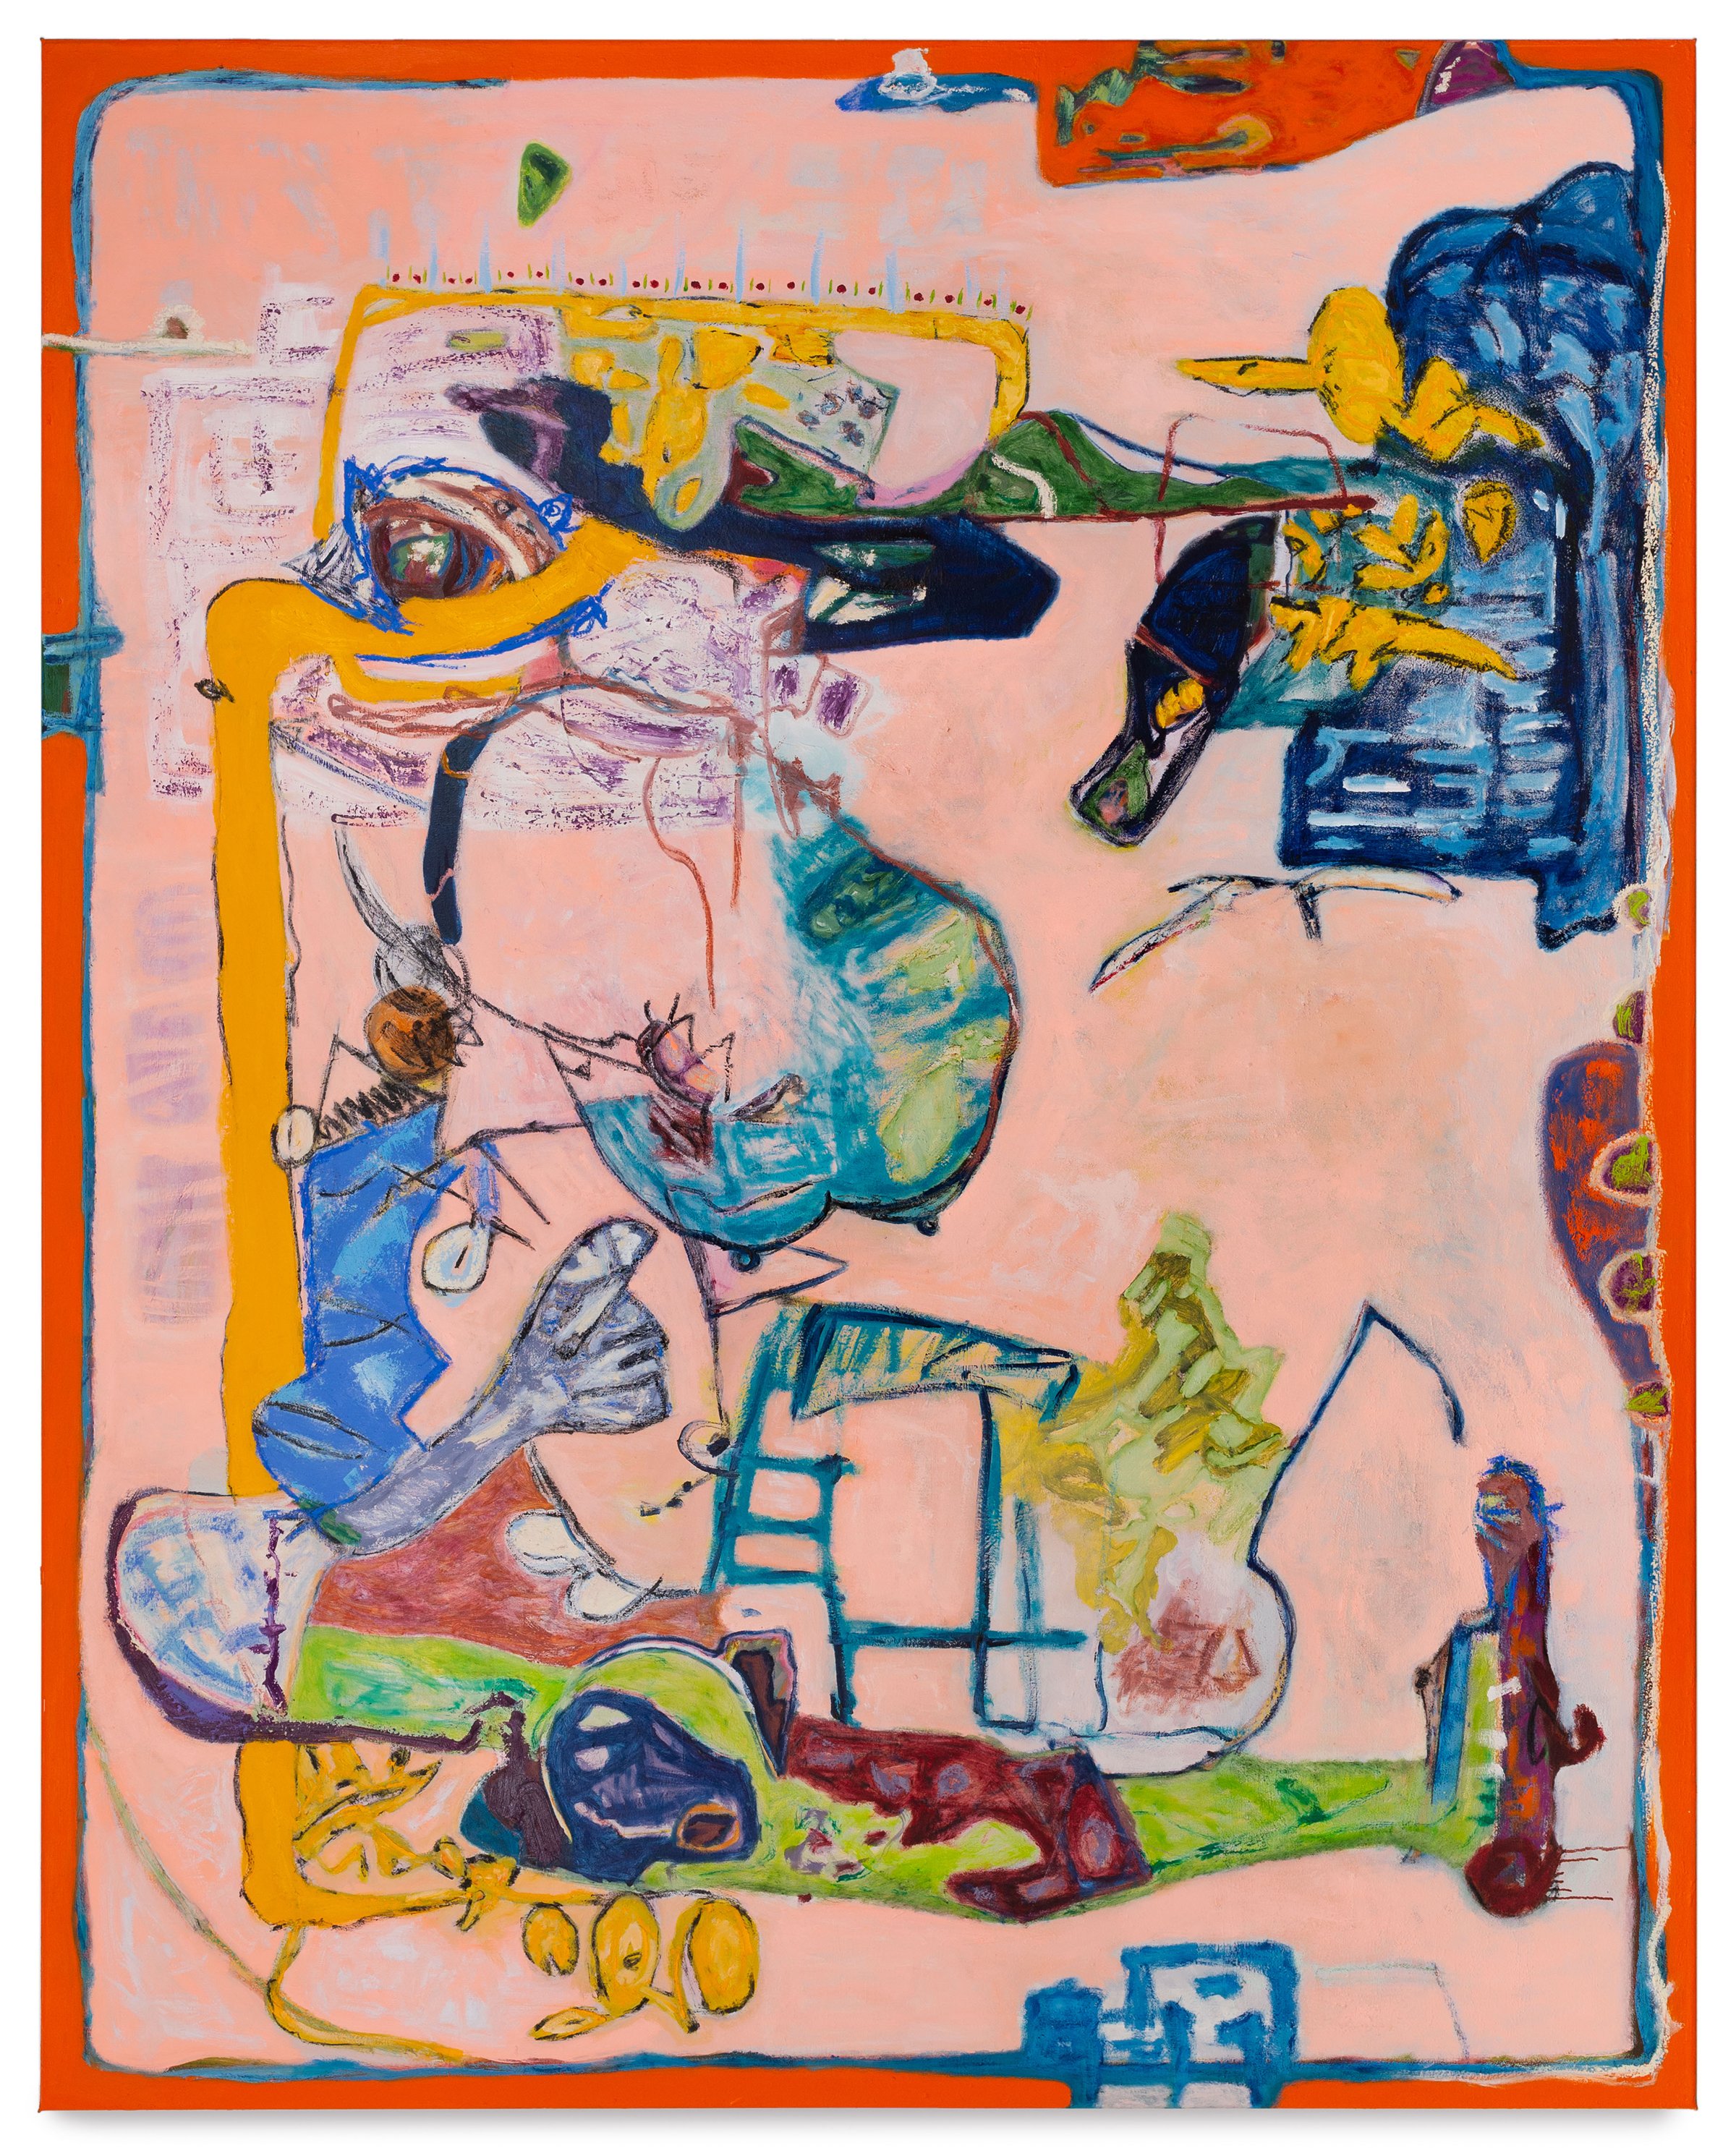   Sarah Dwyer,   Rhino Cave,  2021. Oil and pastel on linen, 98.5 x 79 inches.  